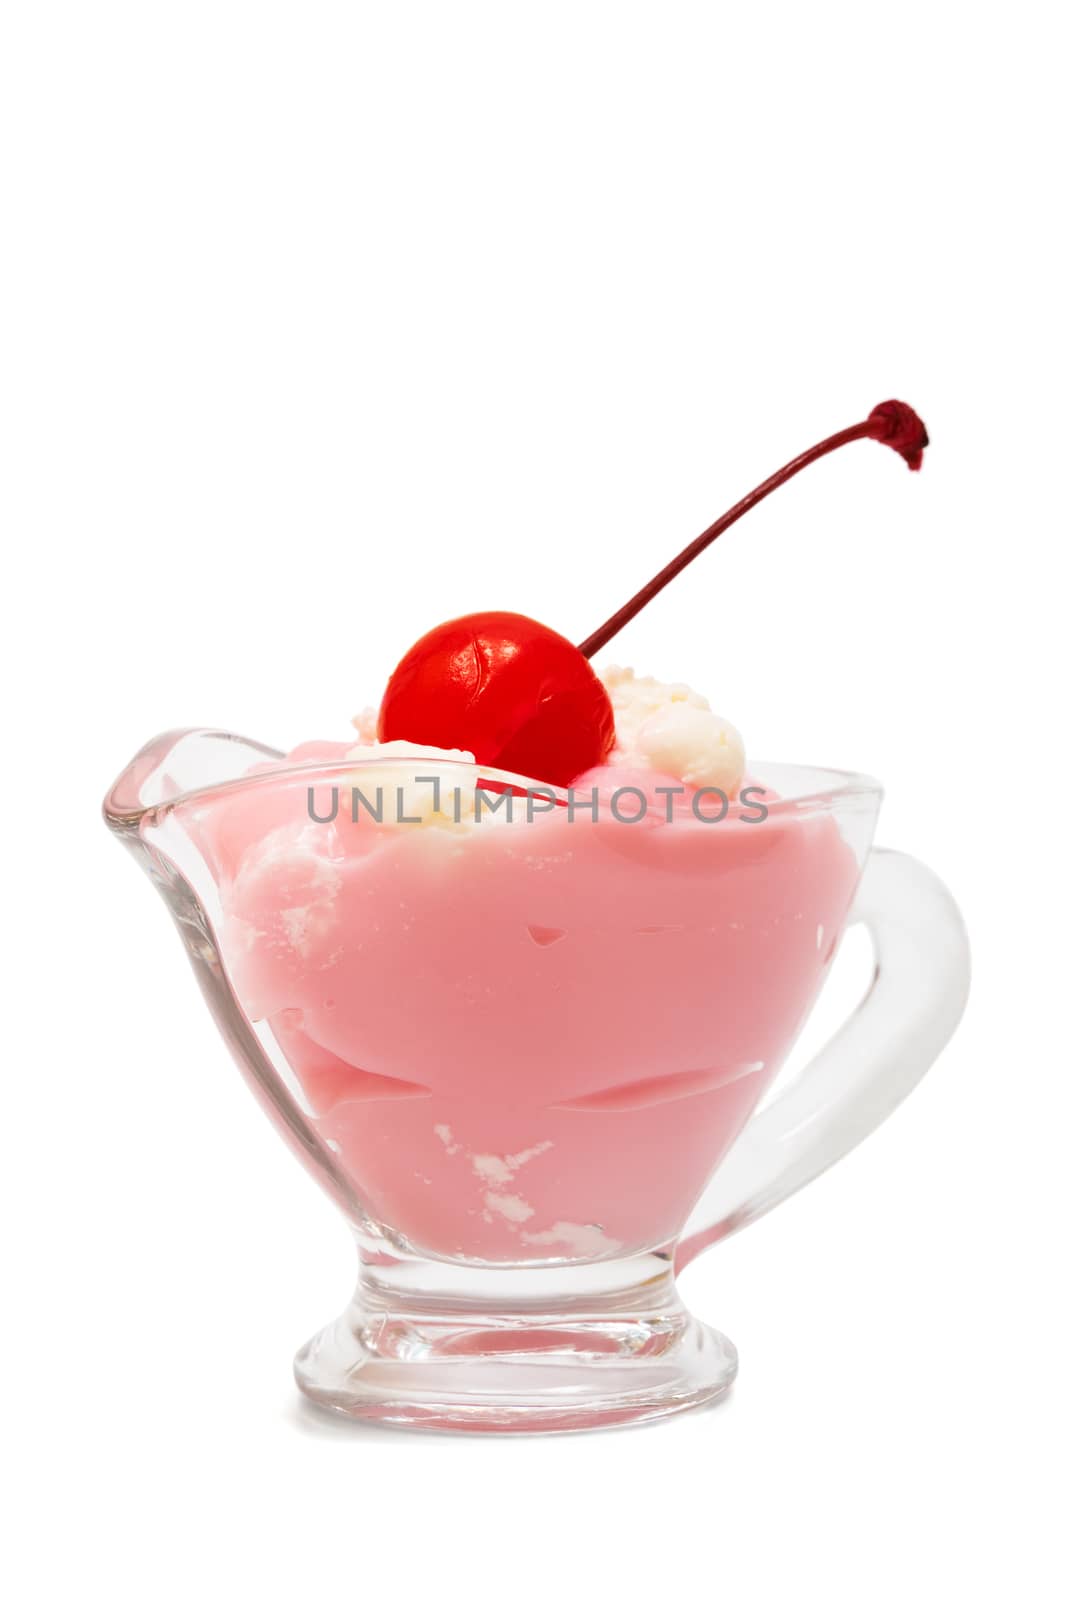 ice cream with a cherry on a white background